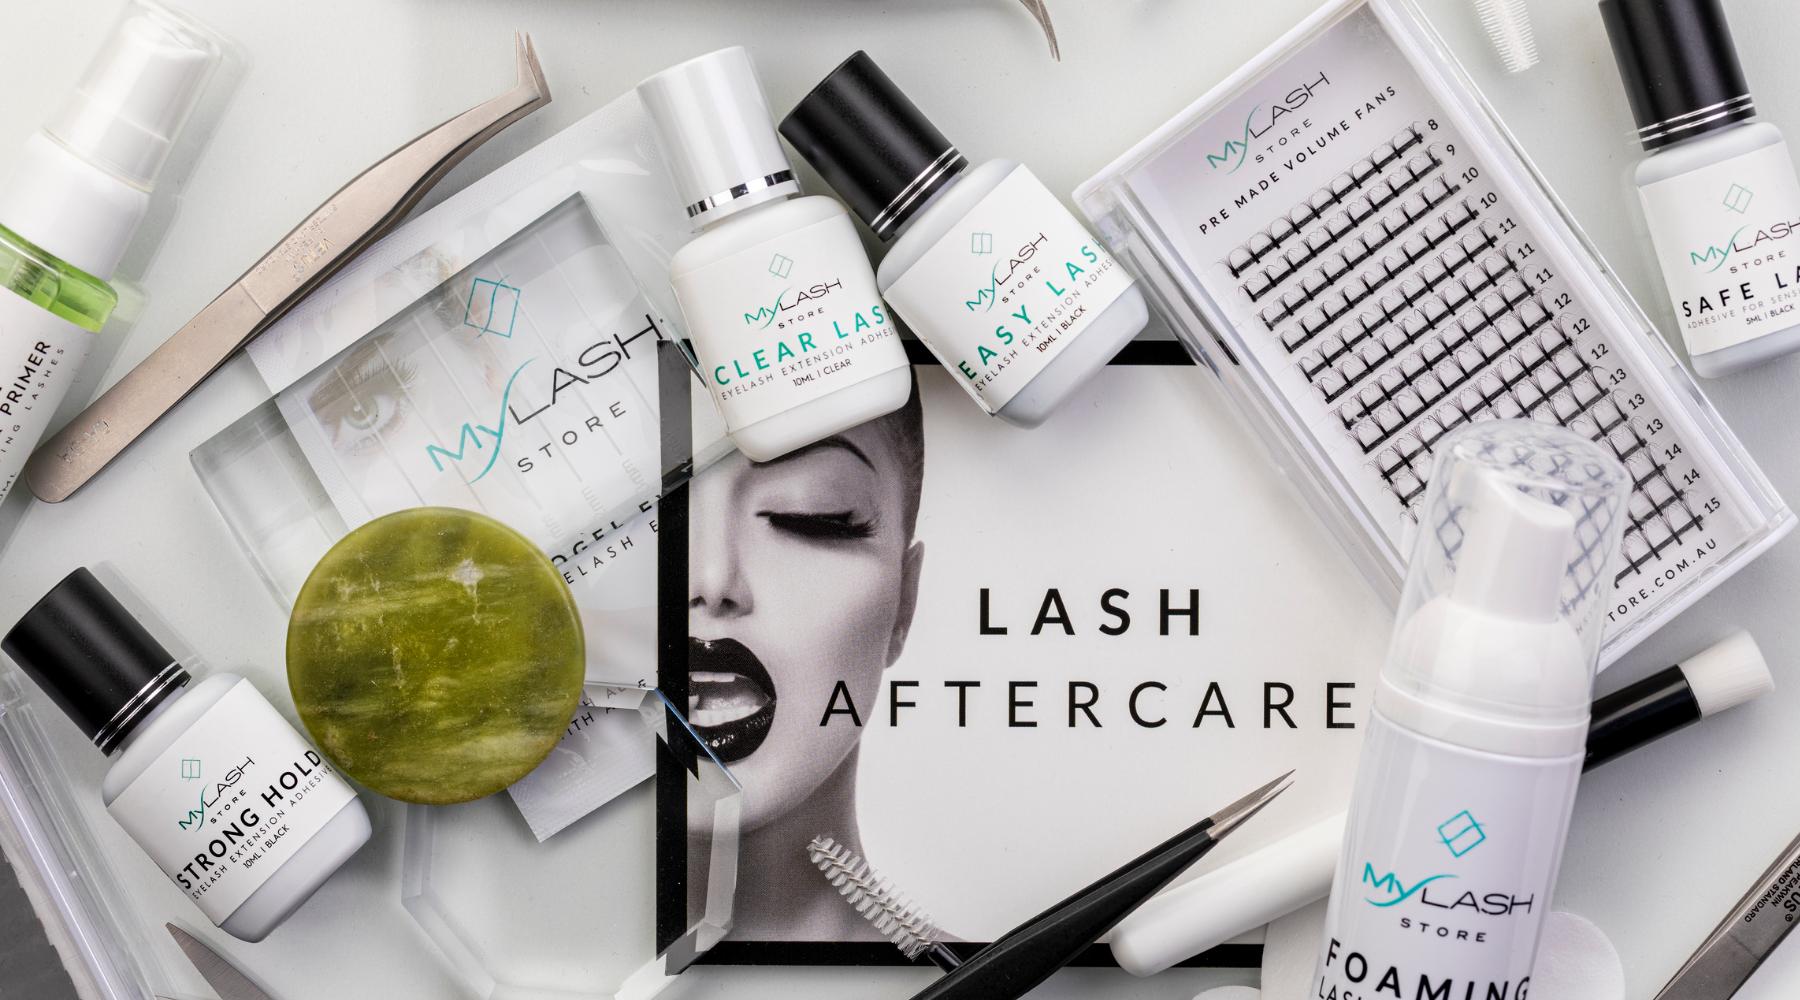 Choosing The Right Products When Starting Your Lash Business